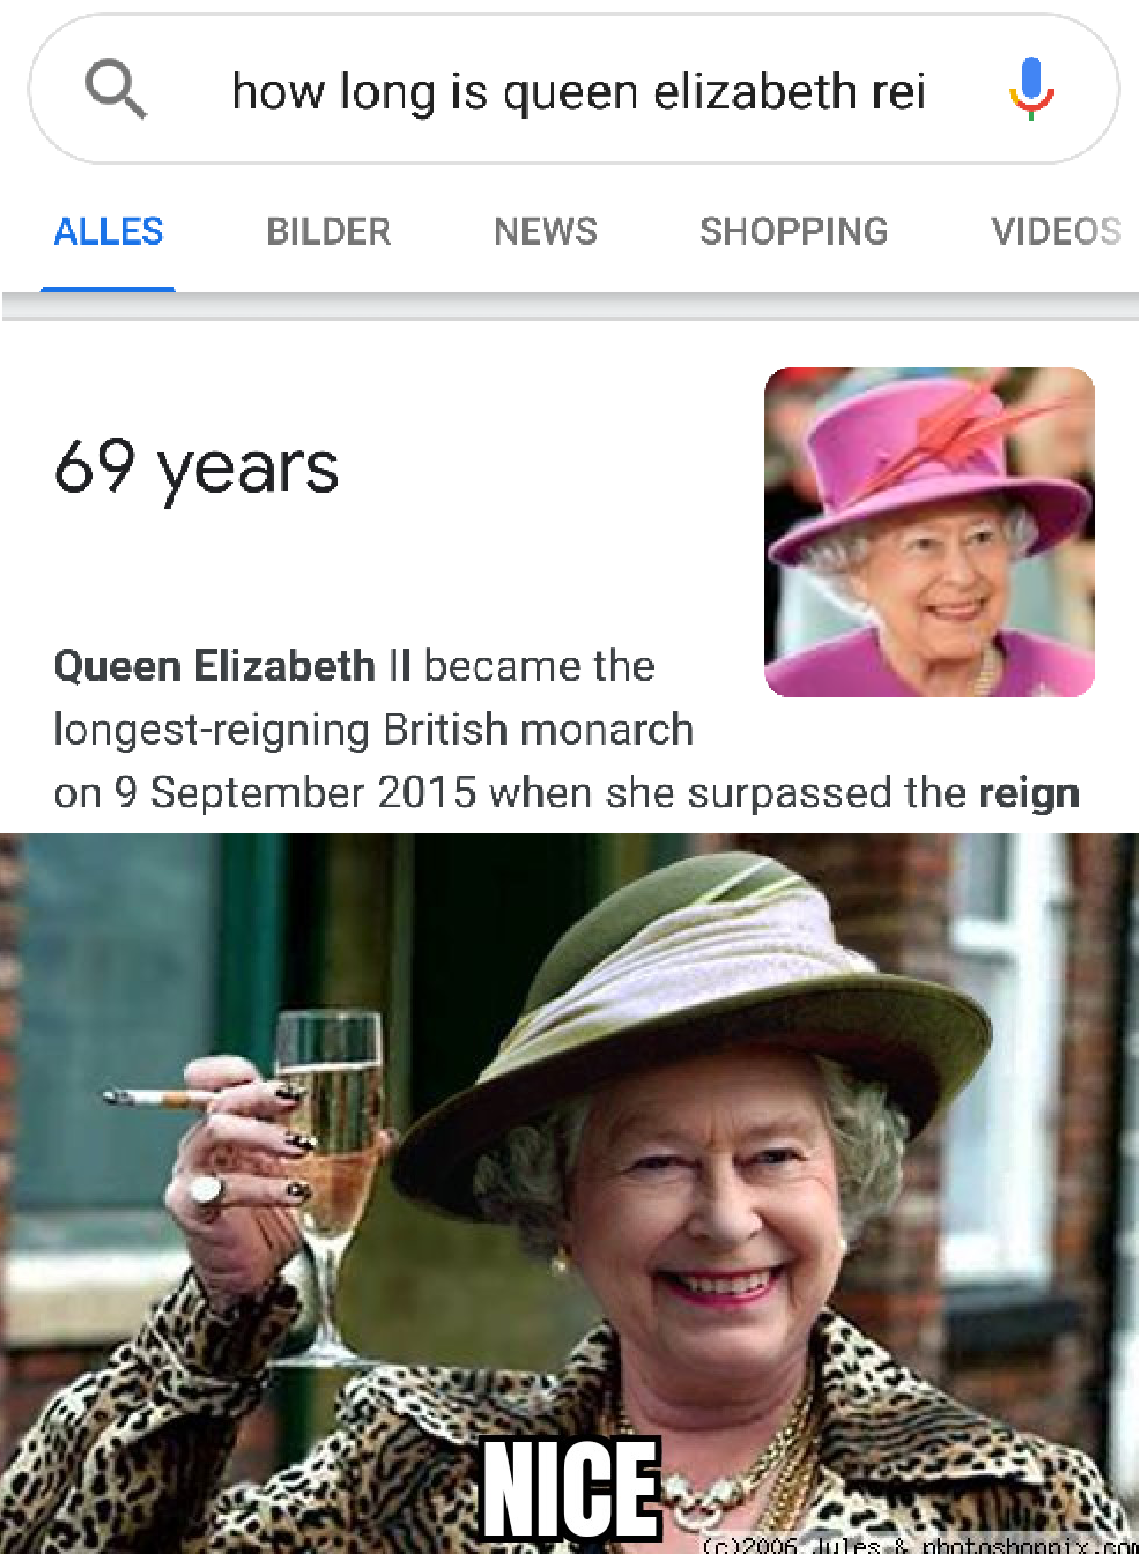 queen cheers - Q how long is queen elizabeth rei Alles Bilder News Shopping Videos 69 years Queen Elizabeth Ii became the longestreigning British monarch on when she surpassed the reign Nice 2006